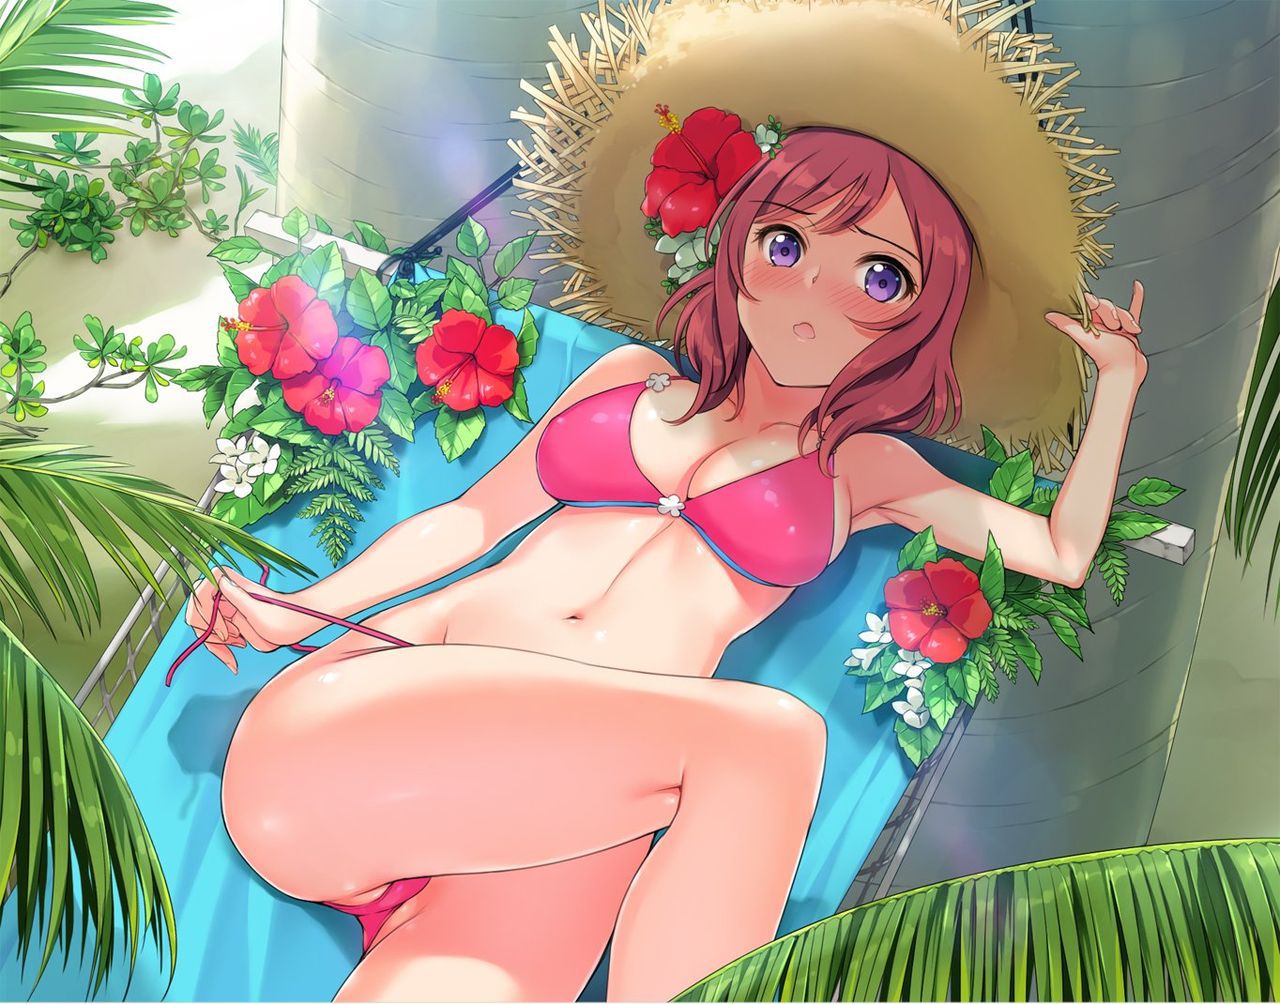 Erotic image I tried to collect the image of cute Maki Nishikino, but it's too erotic ... (Love Live!) ) 18